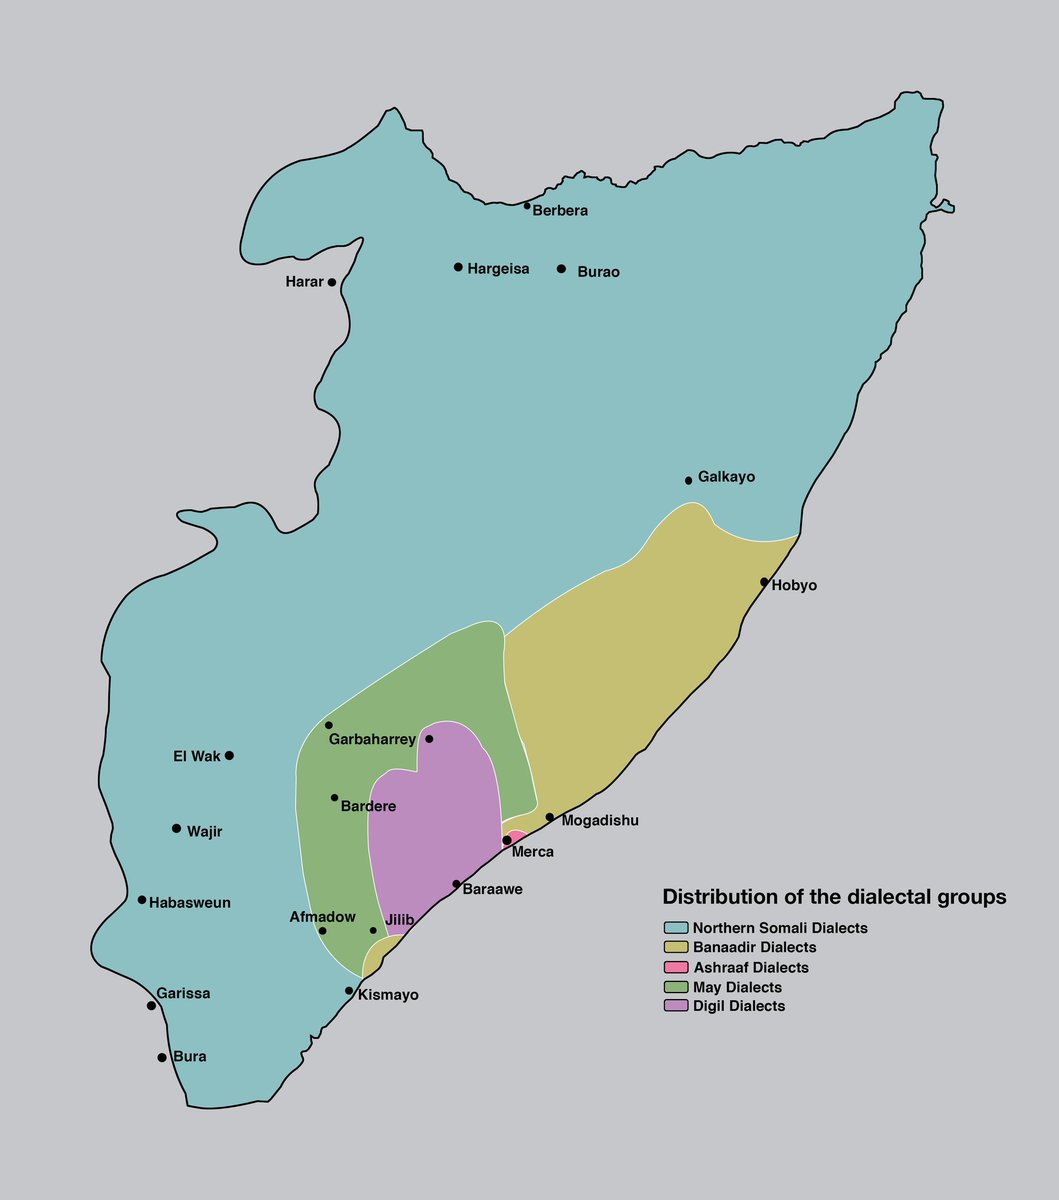 remember when I said languages rather than language, Somali has as many three different languages and sometimes even more depends on how u count it ofc, but for nationalists this was all just different dialects